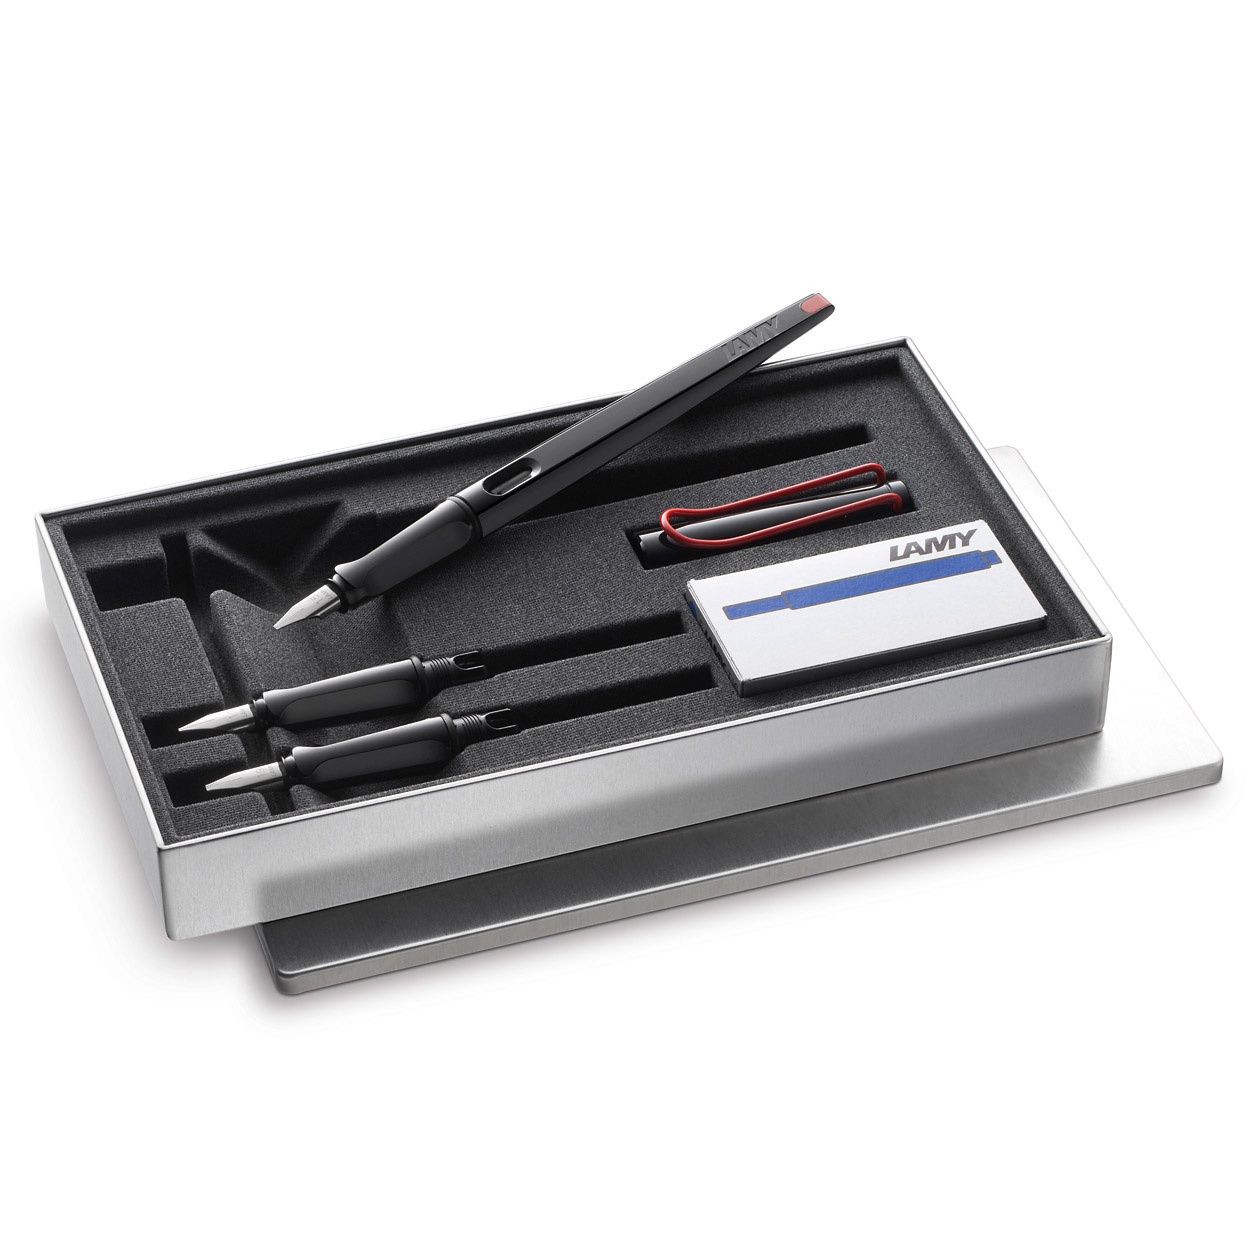 Joy Calligraphy Set in the group Pens / Fine Writing / Fountain Pens at Pen Store (101840)